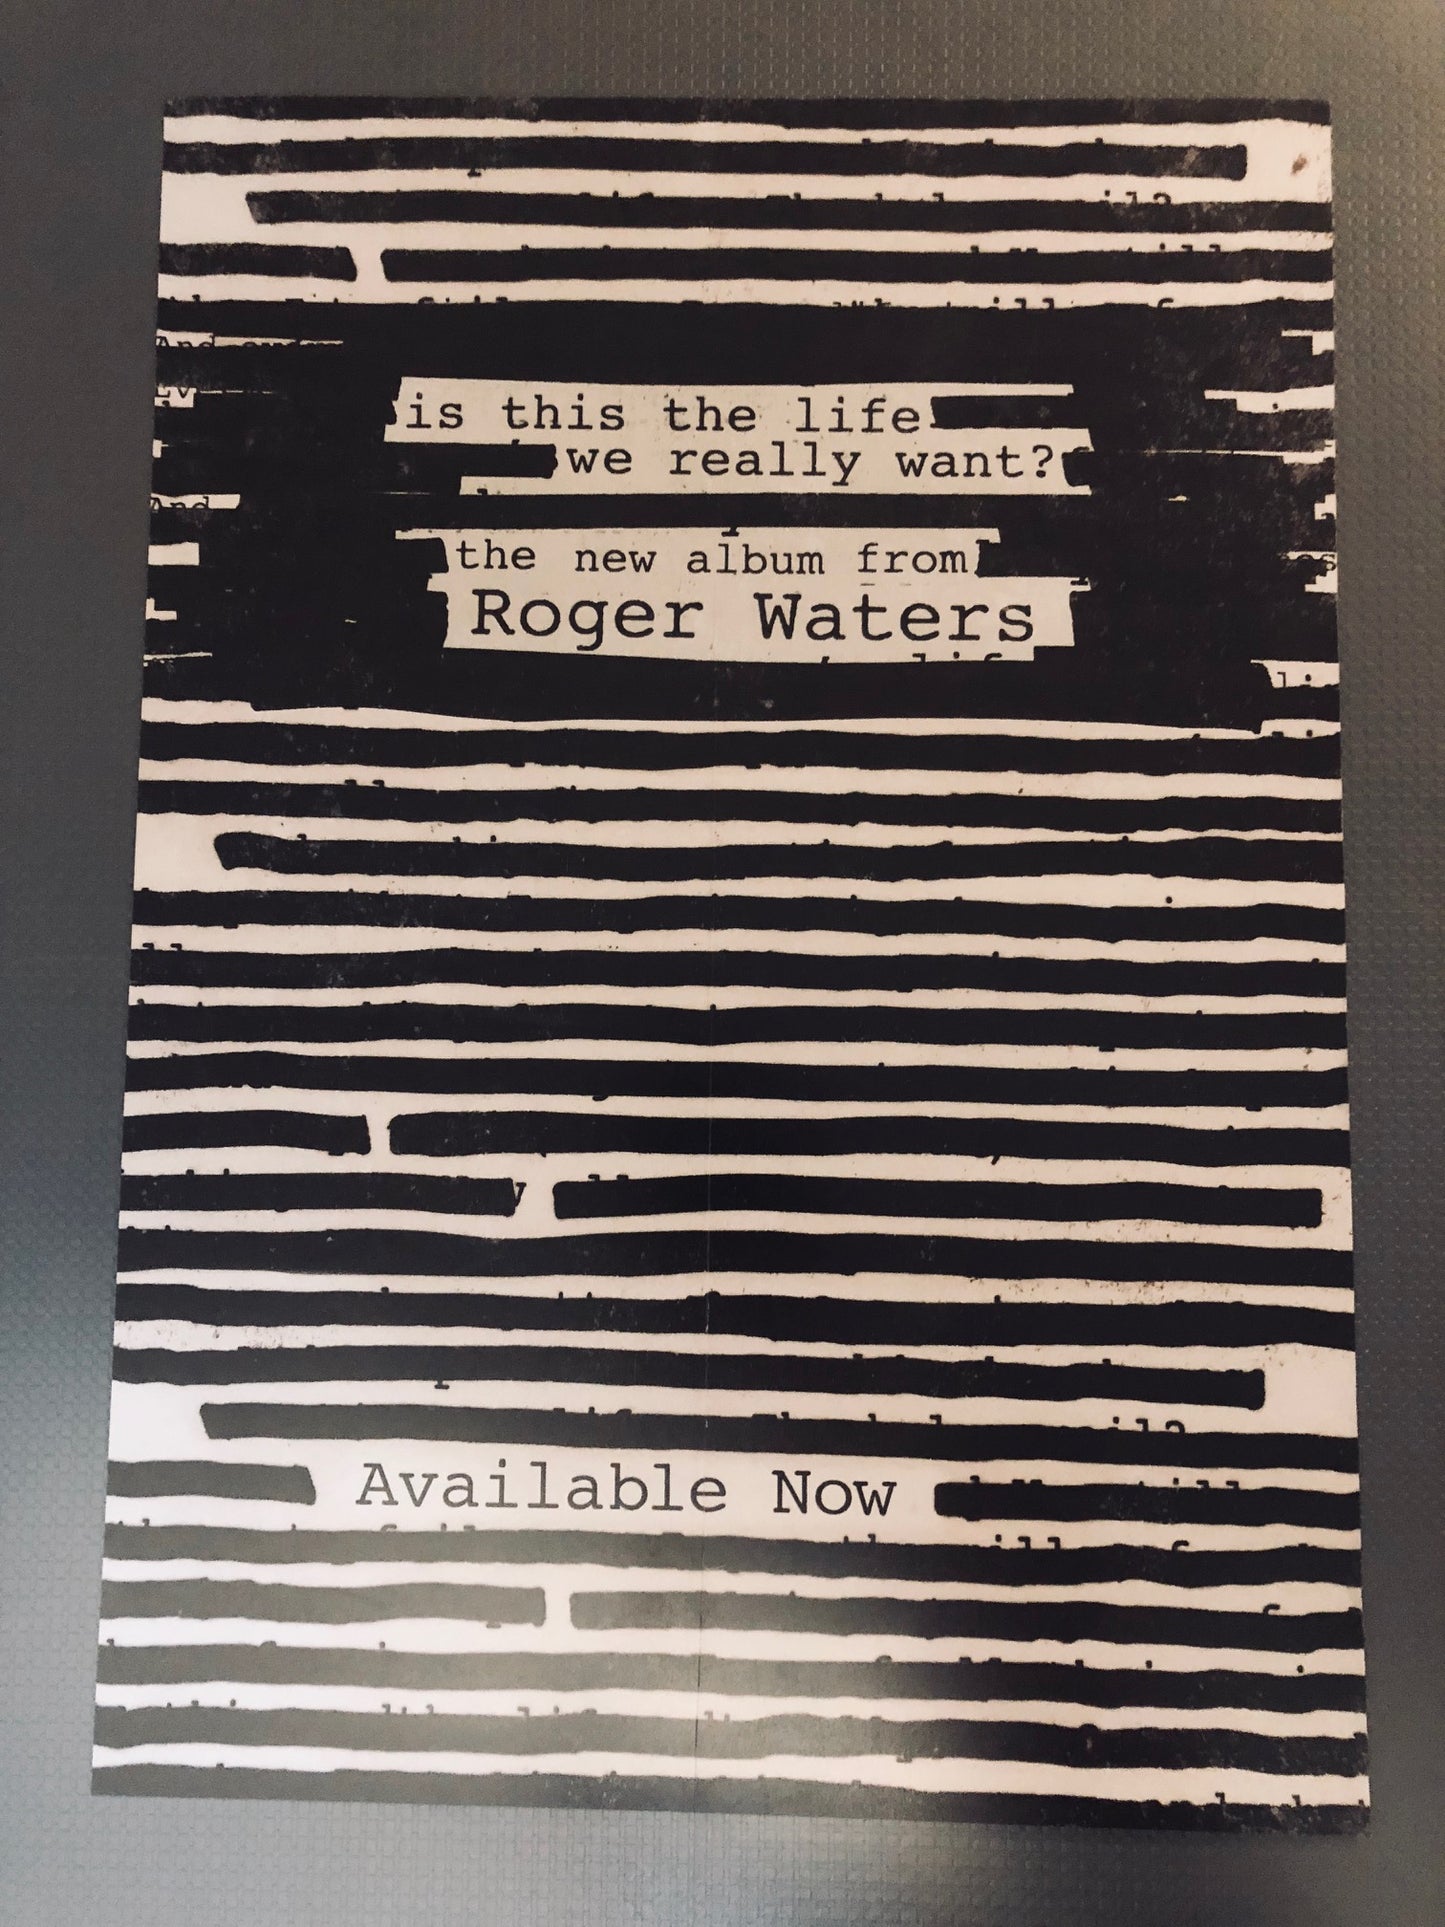 Waters, Roger - Is this the life we really want - Poster